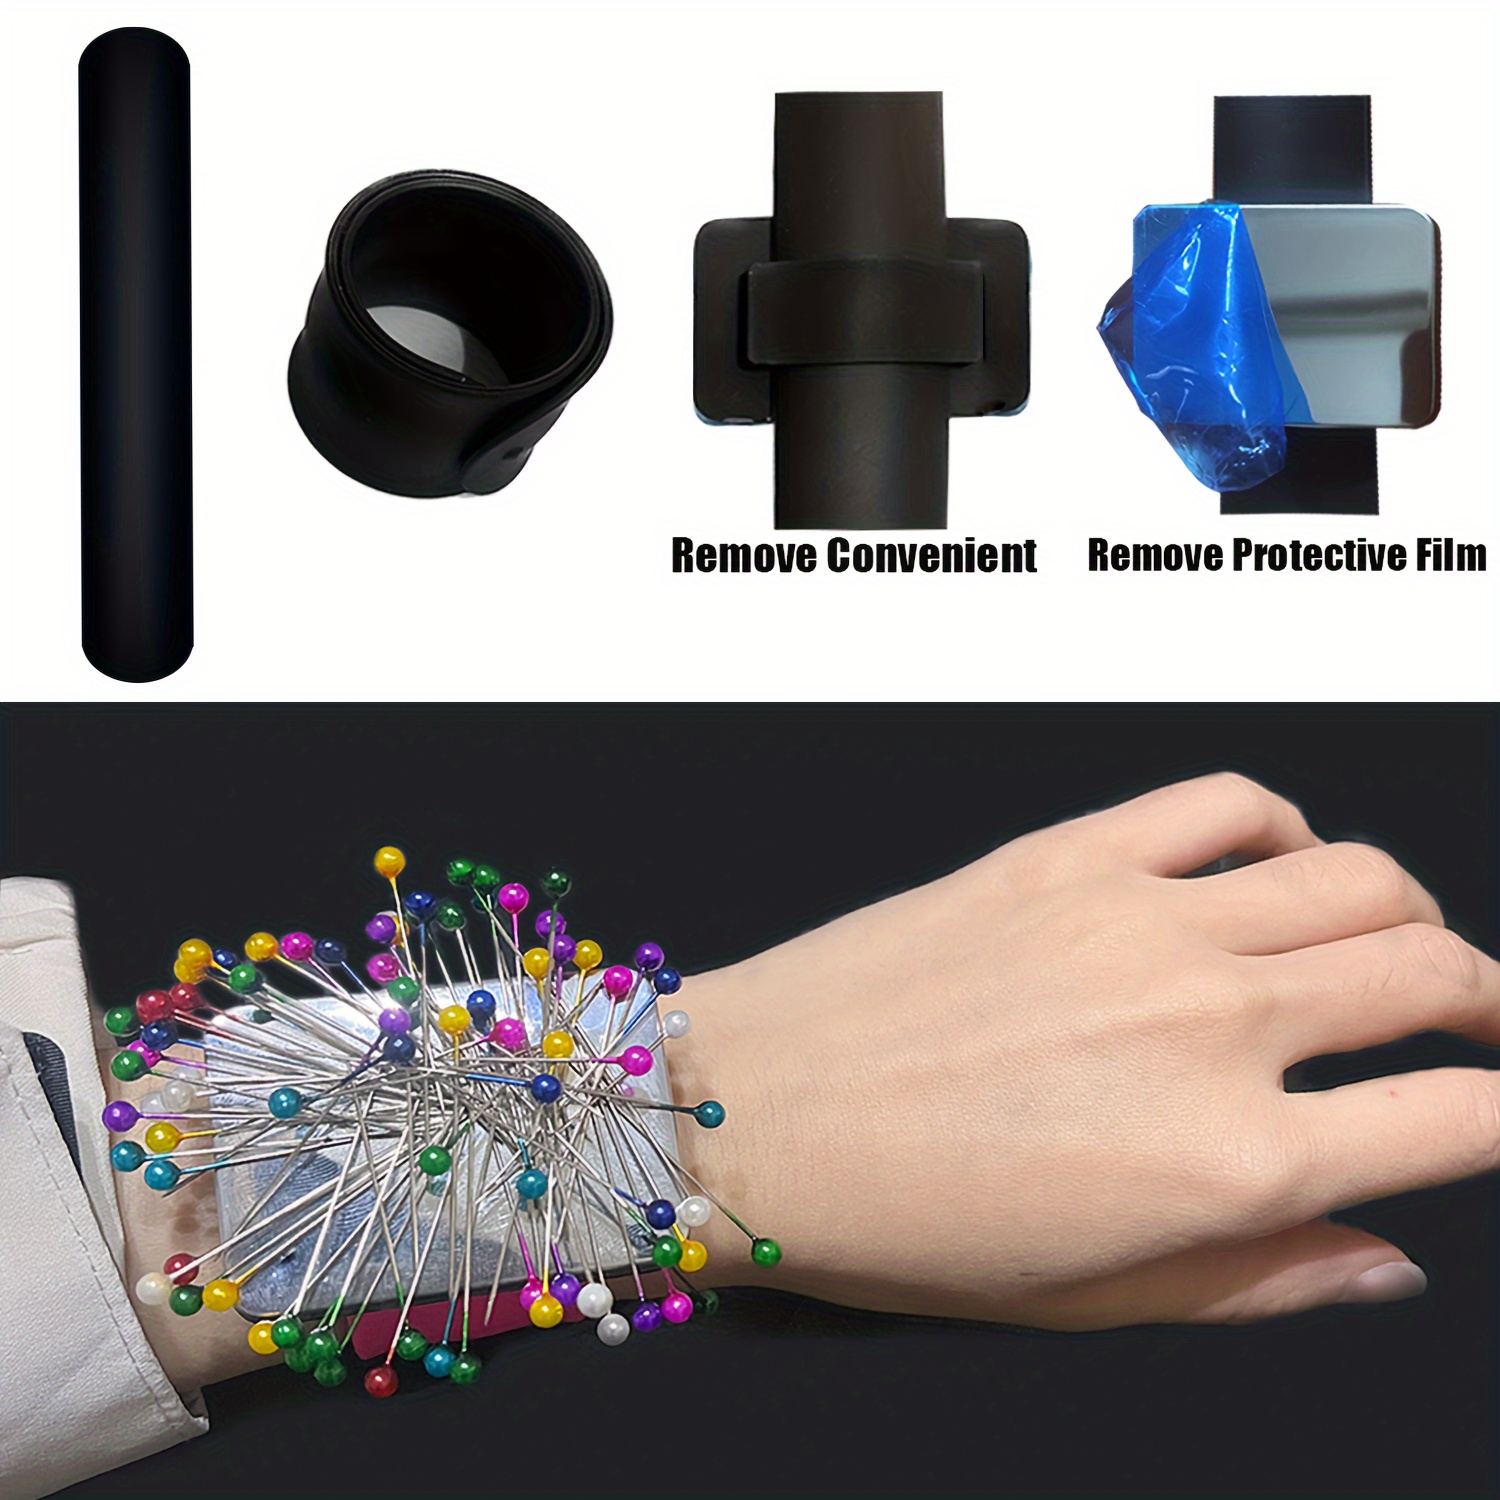 Magnetic Silicone Wrist Strap Bracelet to Hold Metal Bobby Pins and Clips  in Easy Reach Bobby Pin Bracelet